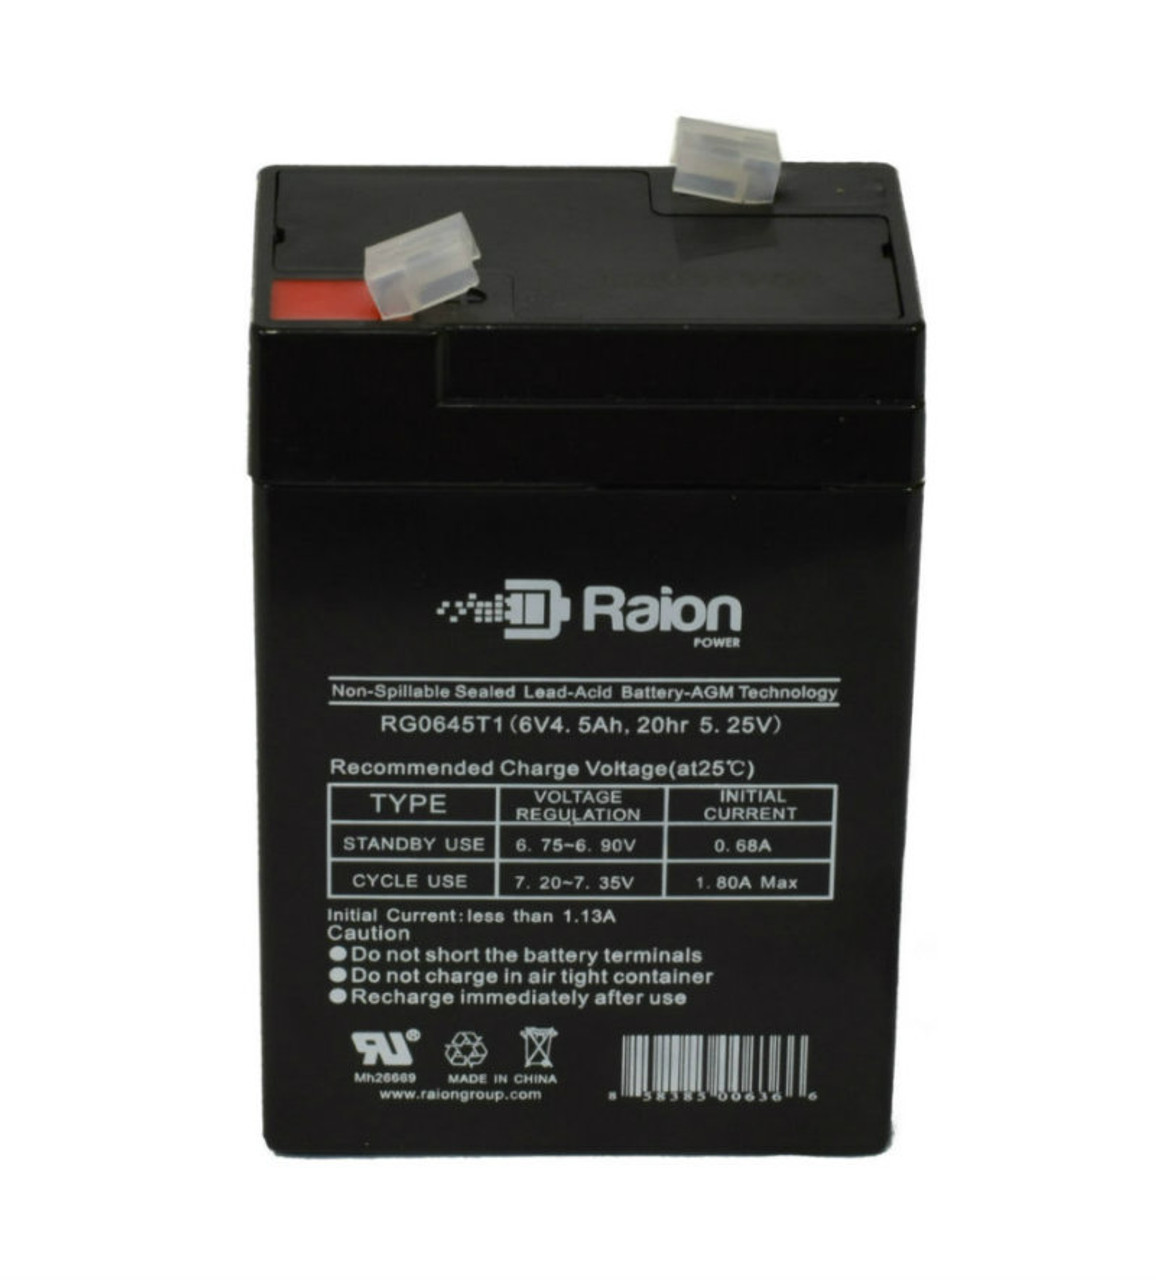 Raion Power RG0645T1 Replacement Battery Cartridge for Light Alarms CE15BL